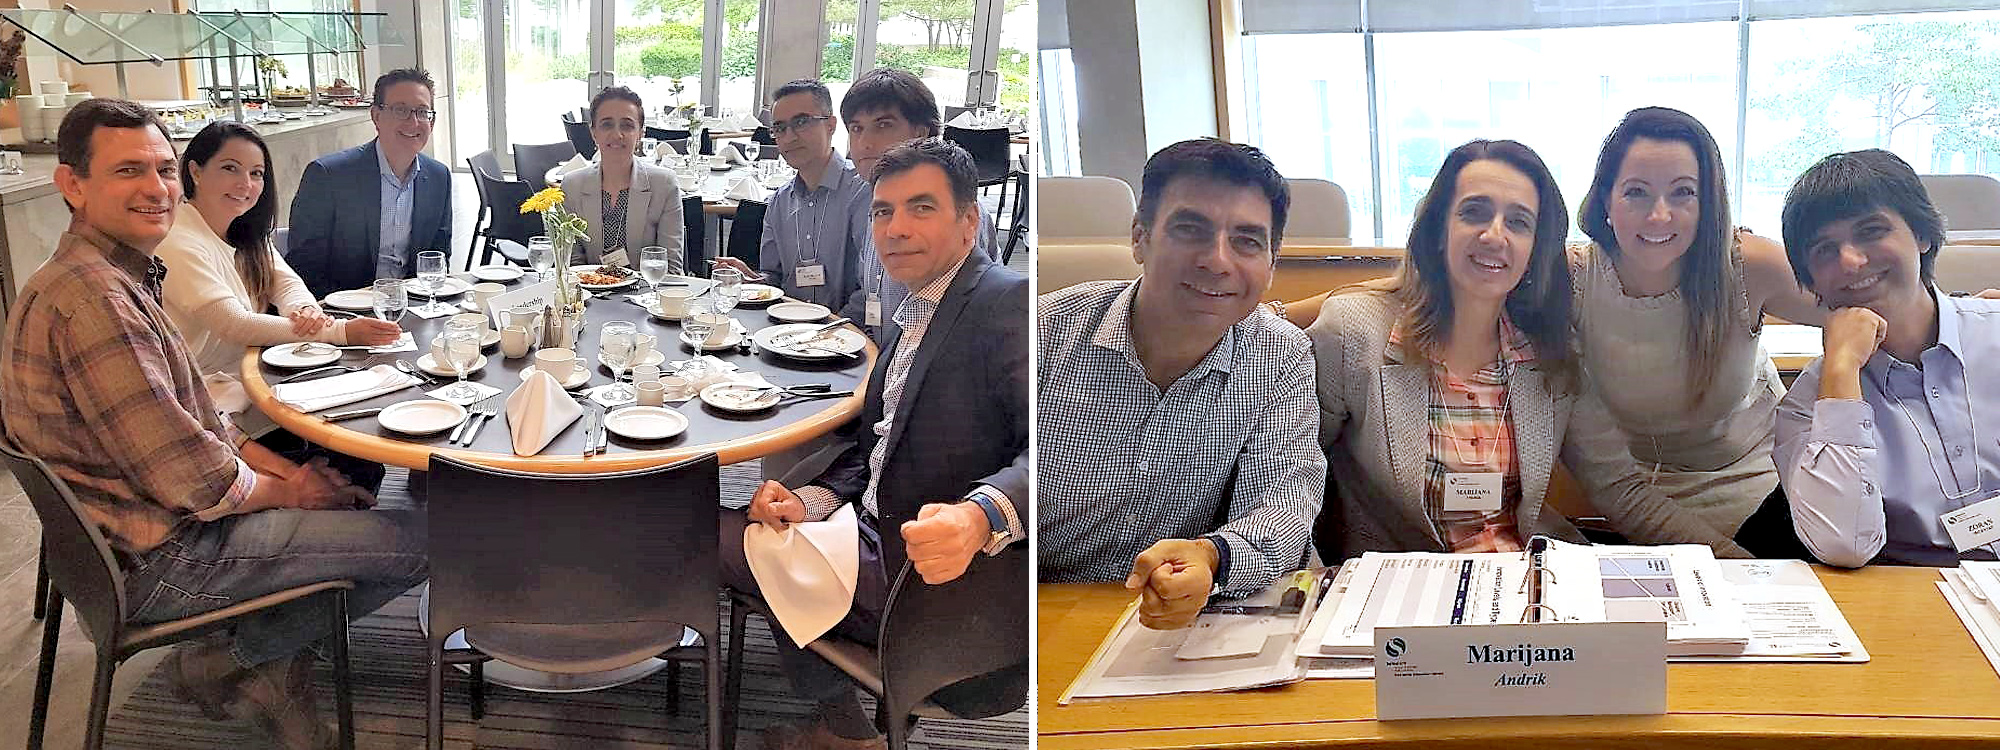 Schulich ExecEd leadership program welcomes participants from Macedonia 2025